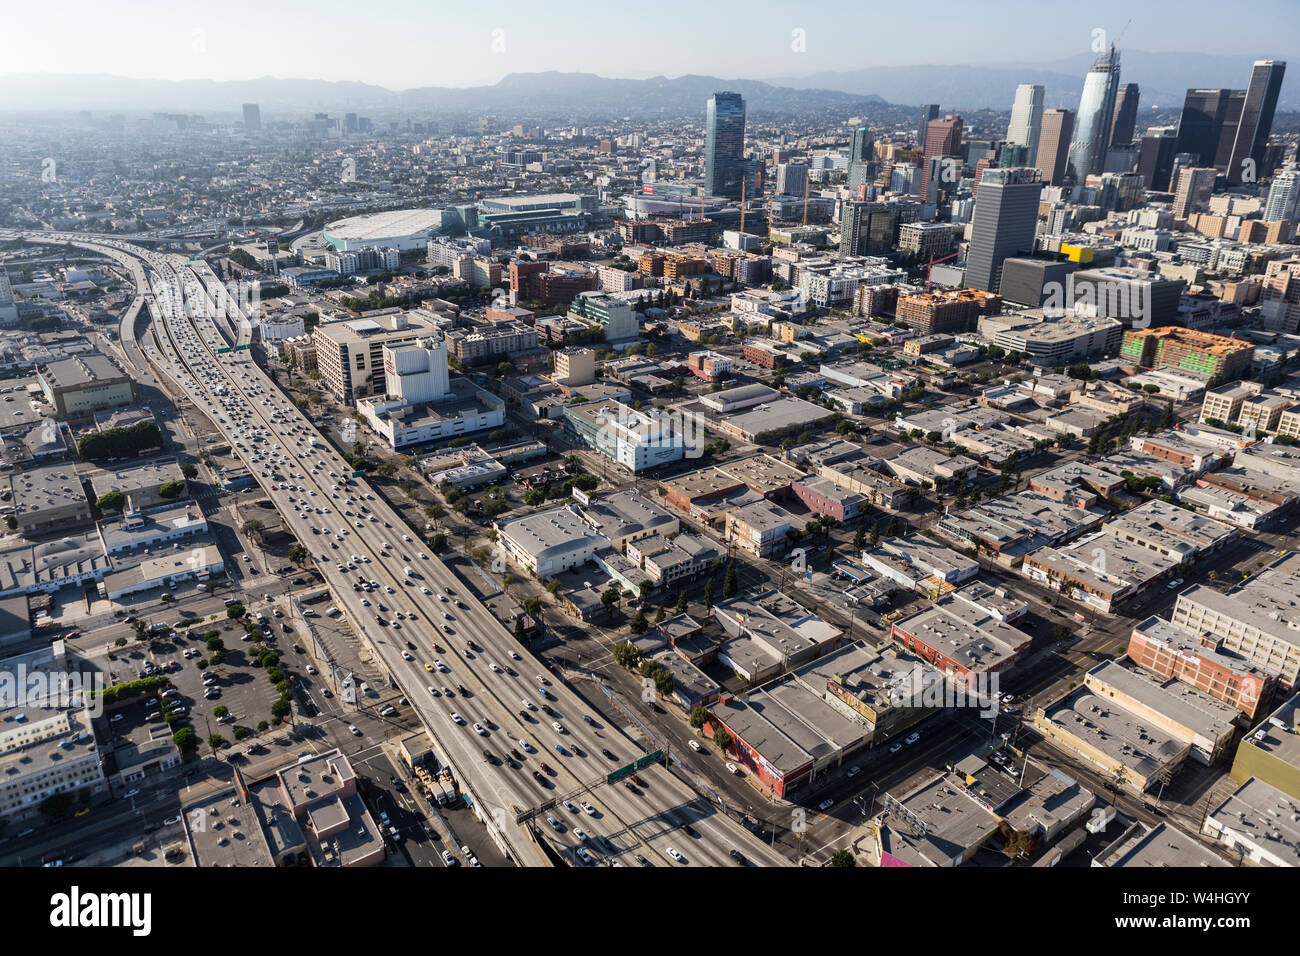 Los Angeles, California, USA - August 6, 2016:  Aerial view of traffic on Interstate 10 freeway south of downtown Los Angeles in Southern California. Stock Photo